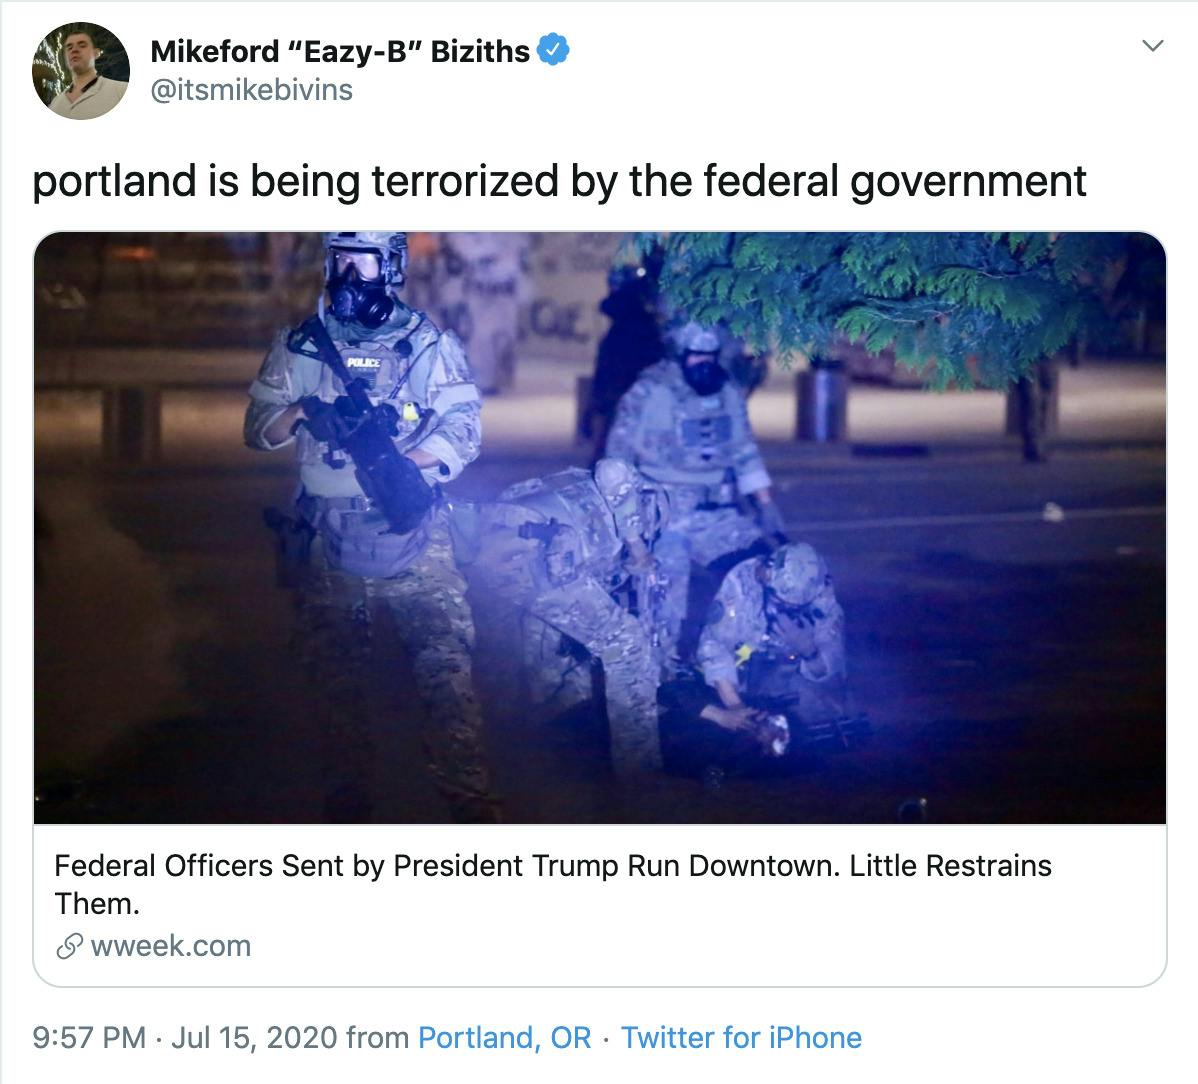 "portland is being terrorized by the federal government" link to an article titled "Federal officers sent by President Trump run downtown. Little restrains them"